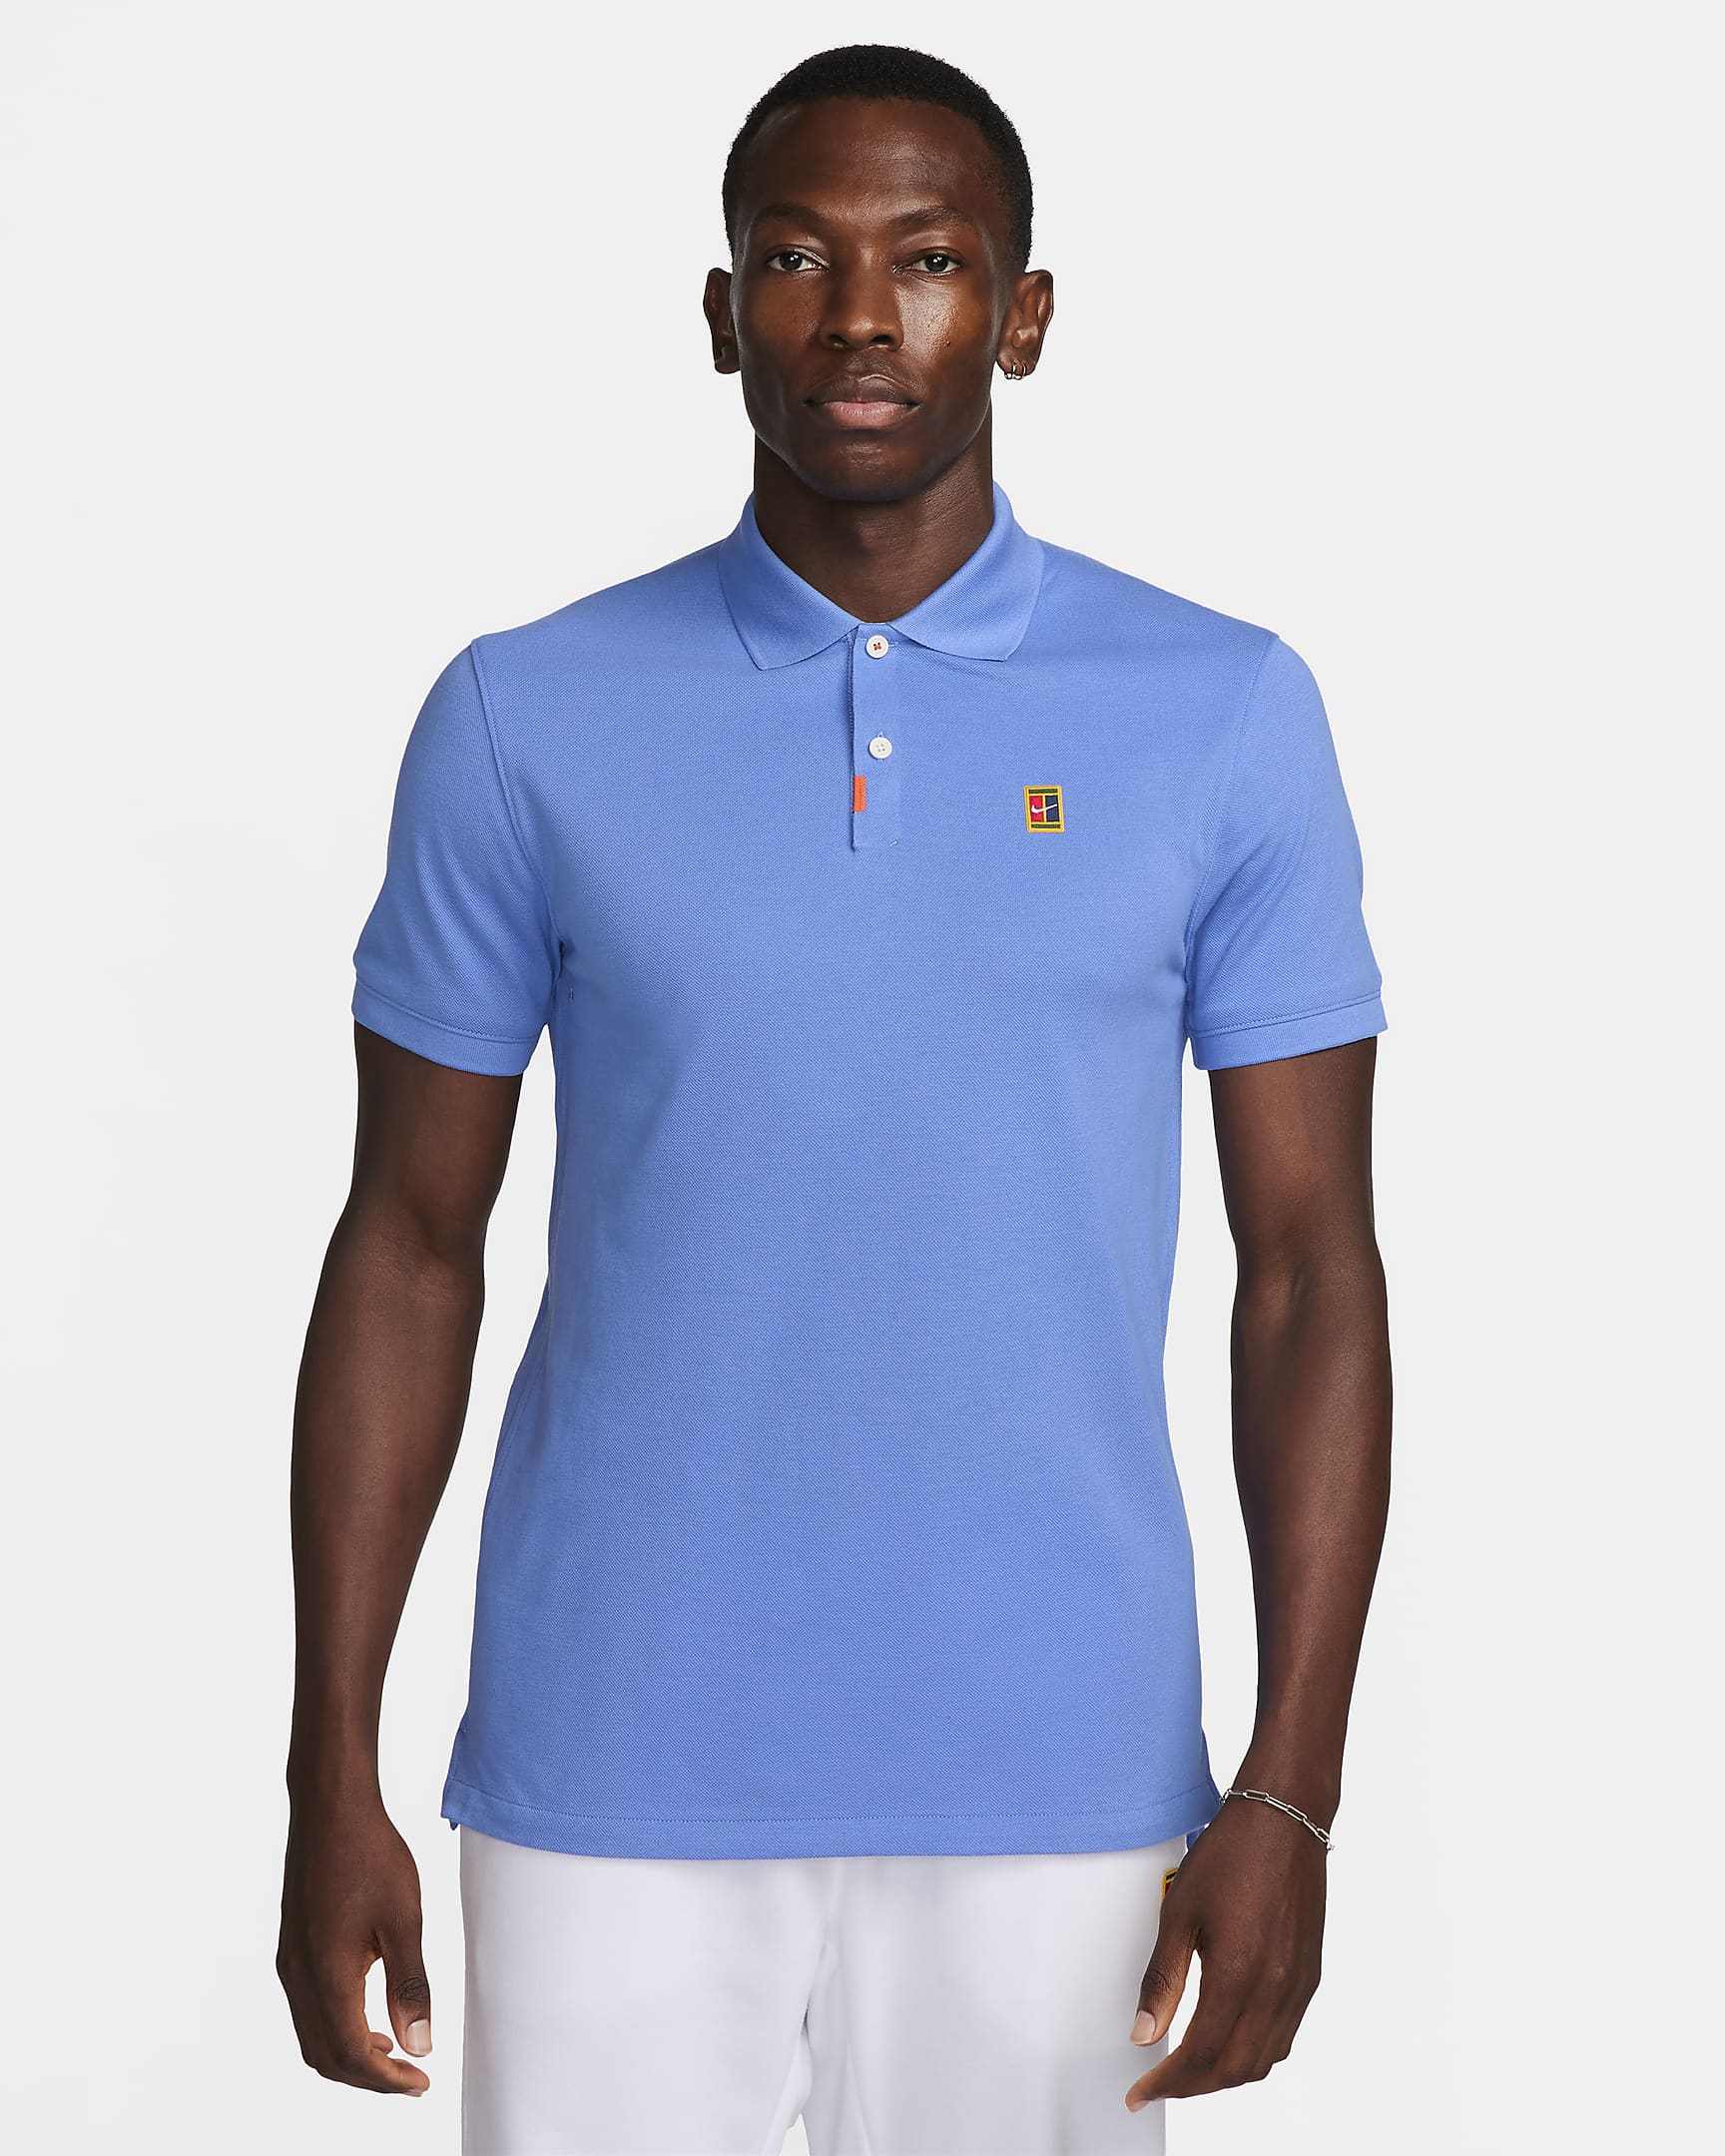 The Nike Polo Men's Slim-Fit Polo. Nike MY